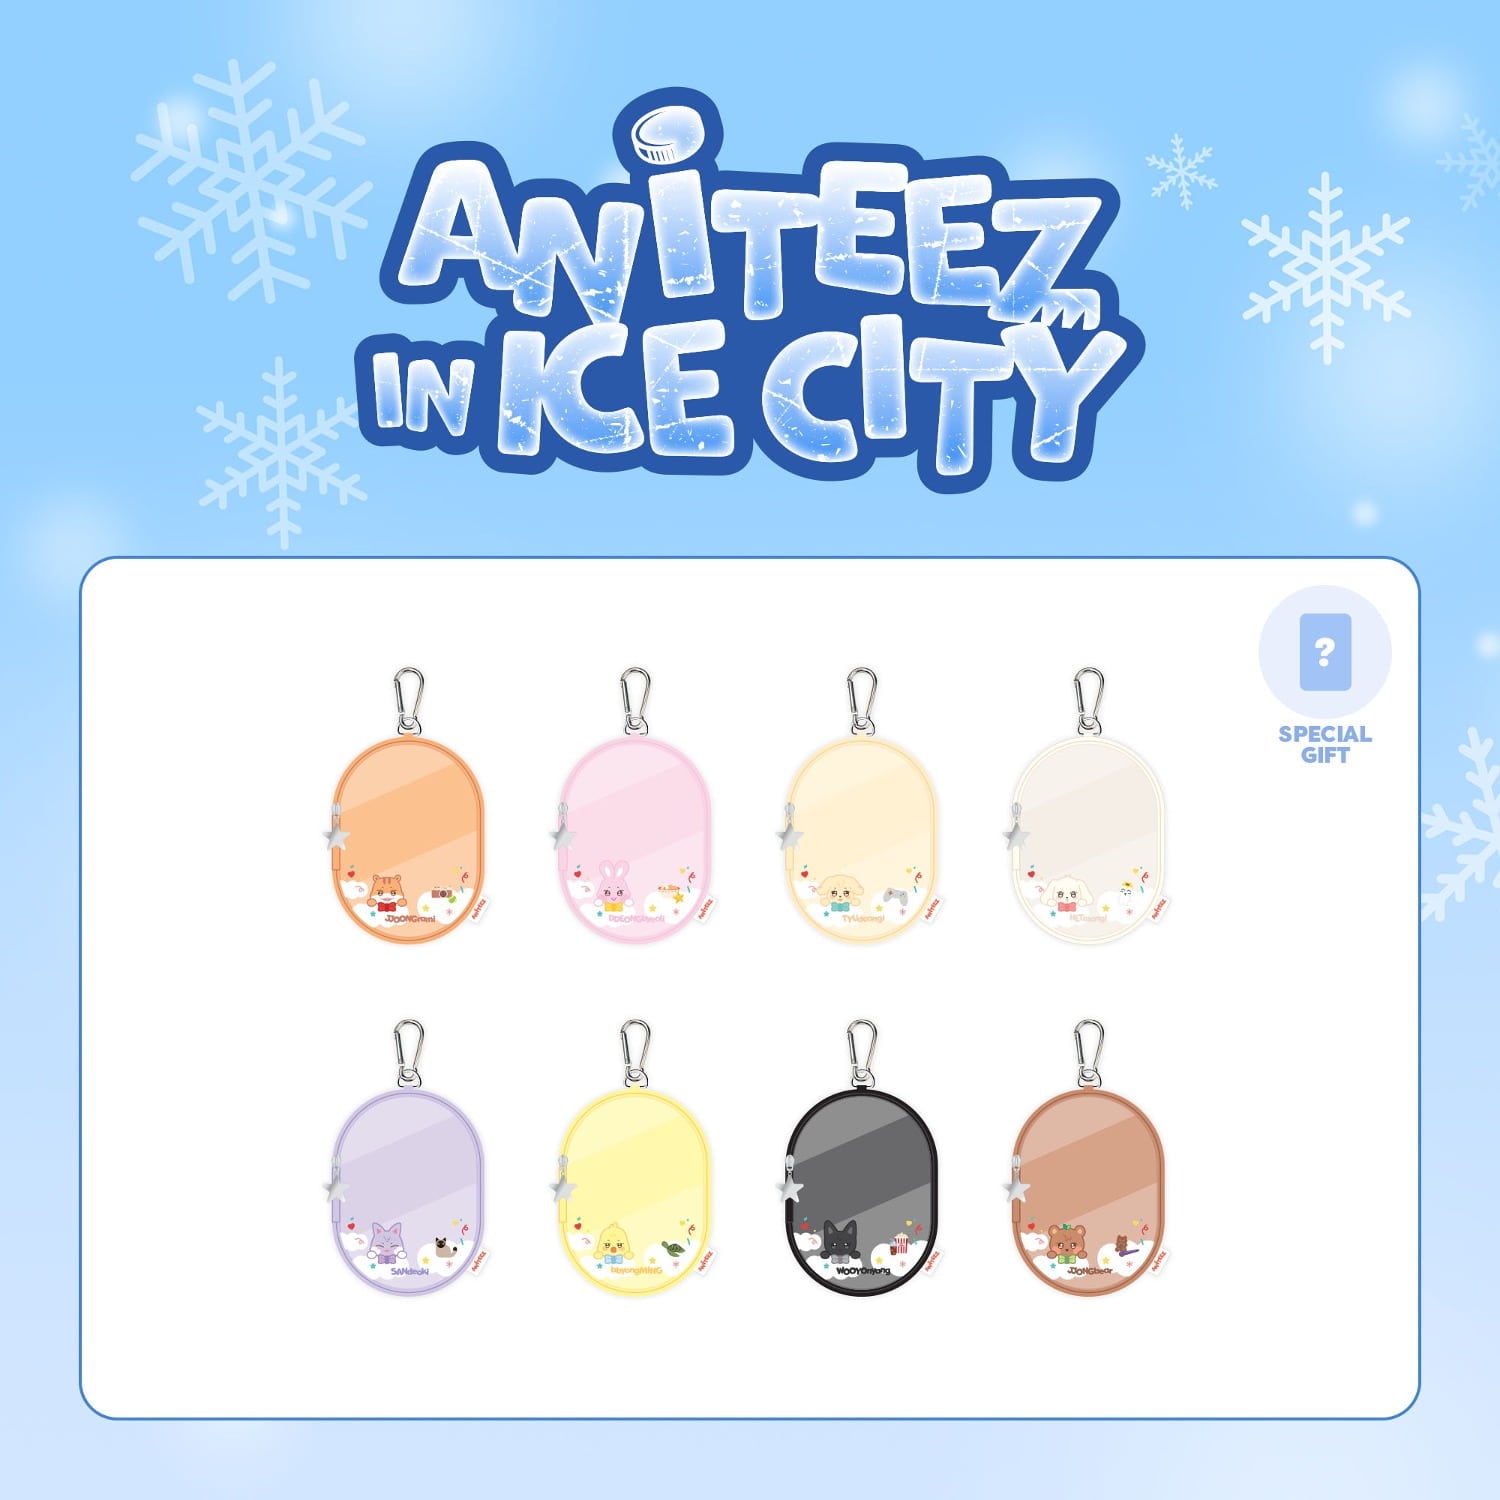 ATEEZ - ATEEZ X ANITEEZ IN ICE CITY OFFICIAL MD PVC POUCH KR VER.